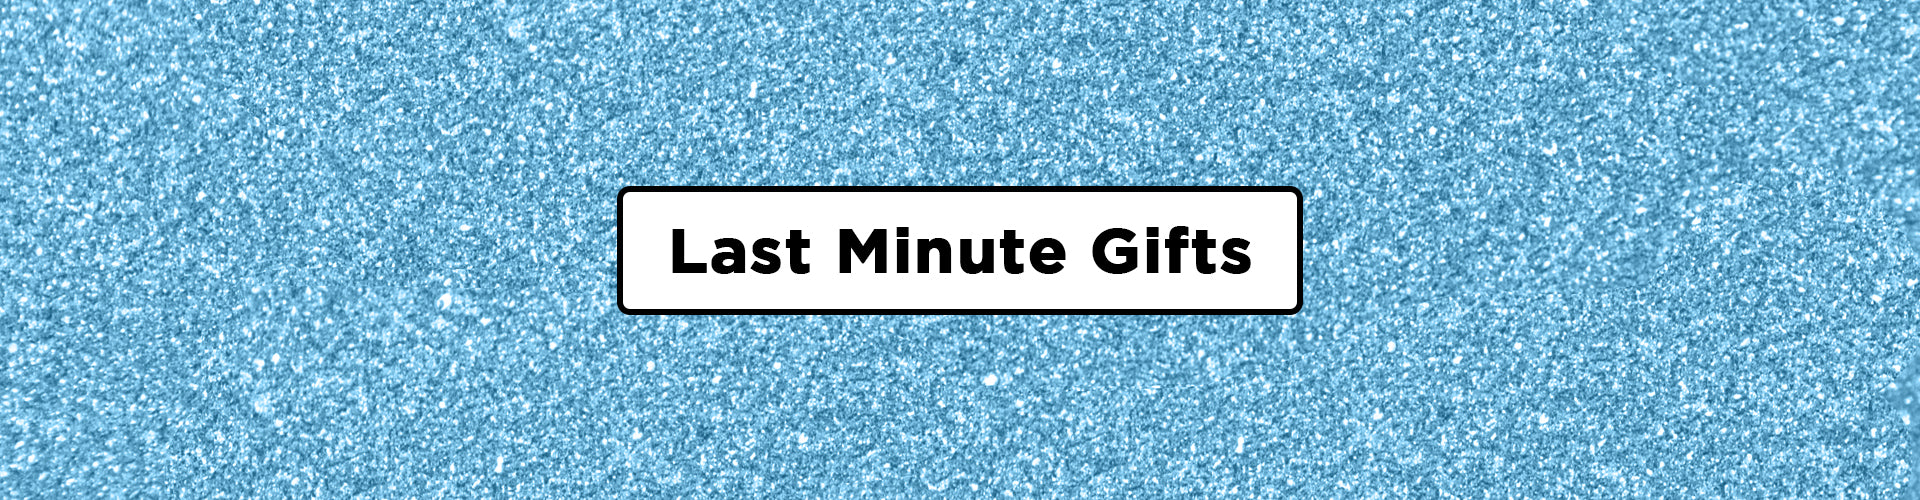 Last minute gifts? Check mate!